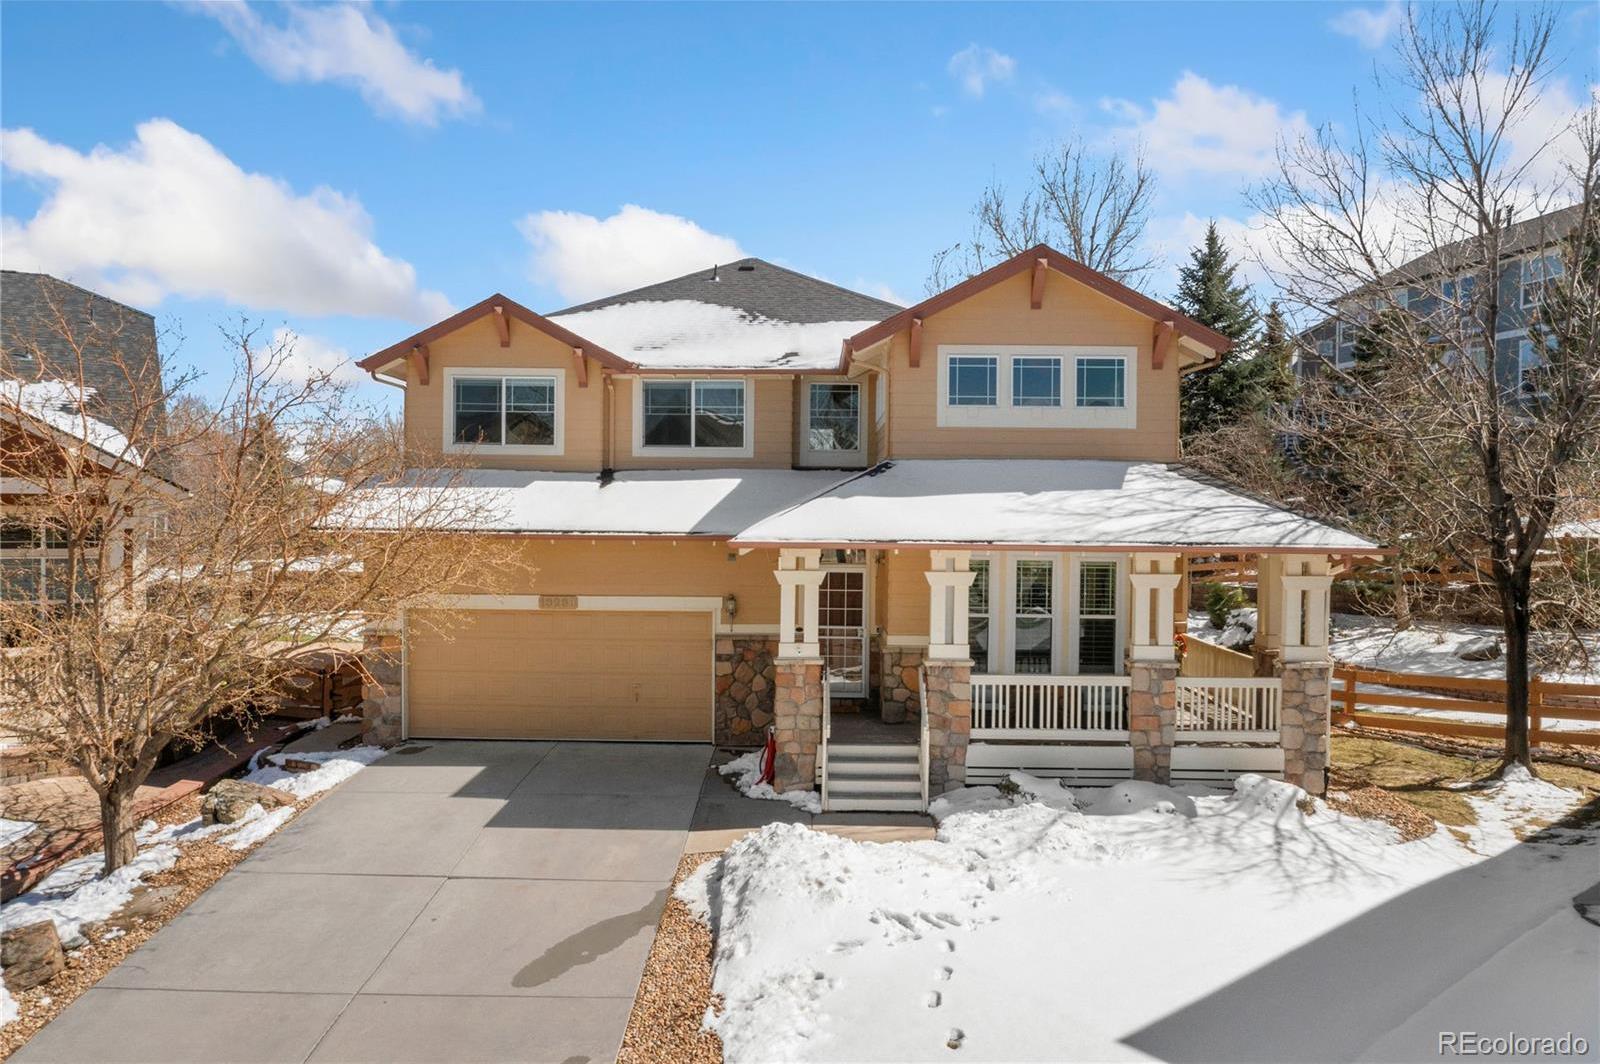 Photo one of 13238 W 84Th Pl Arvada CO 80005 | MLS 7661859